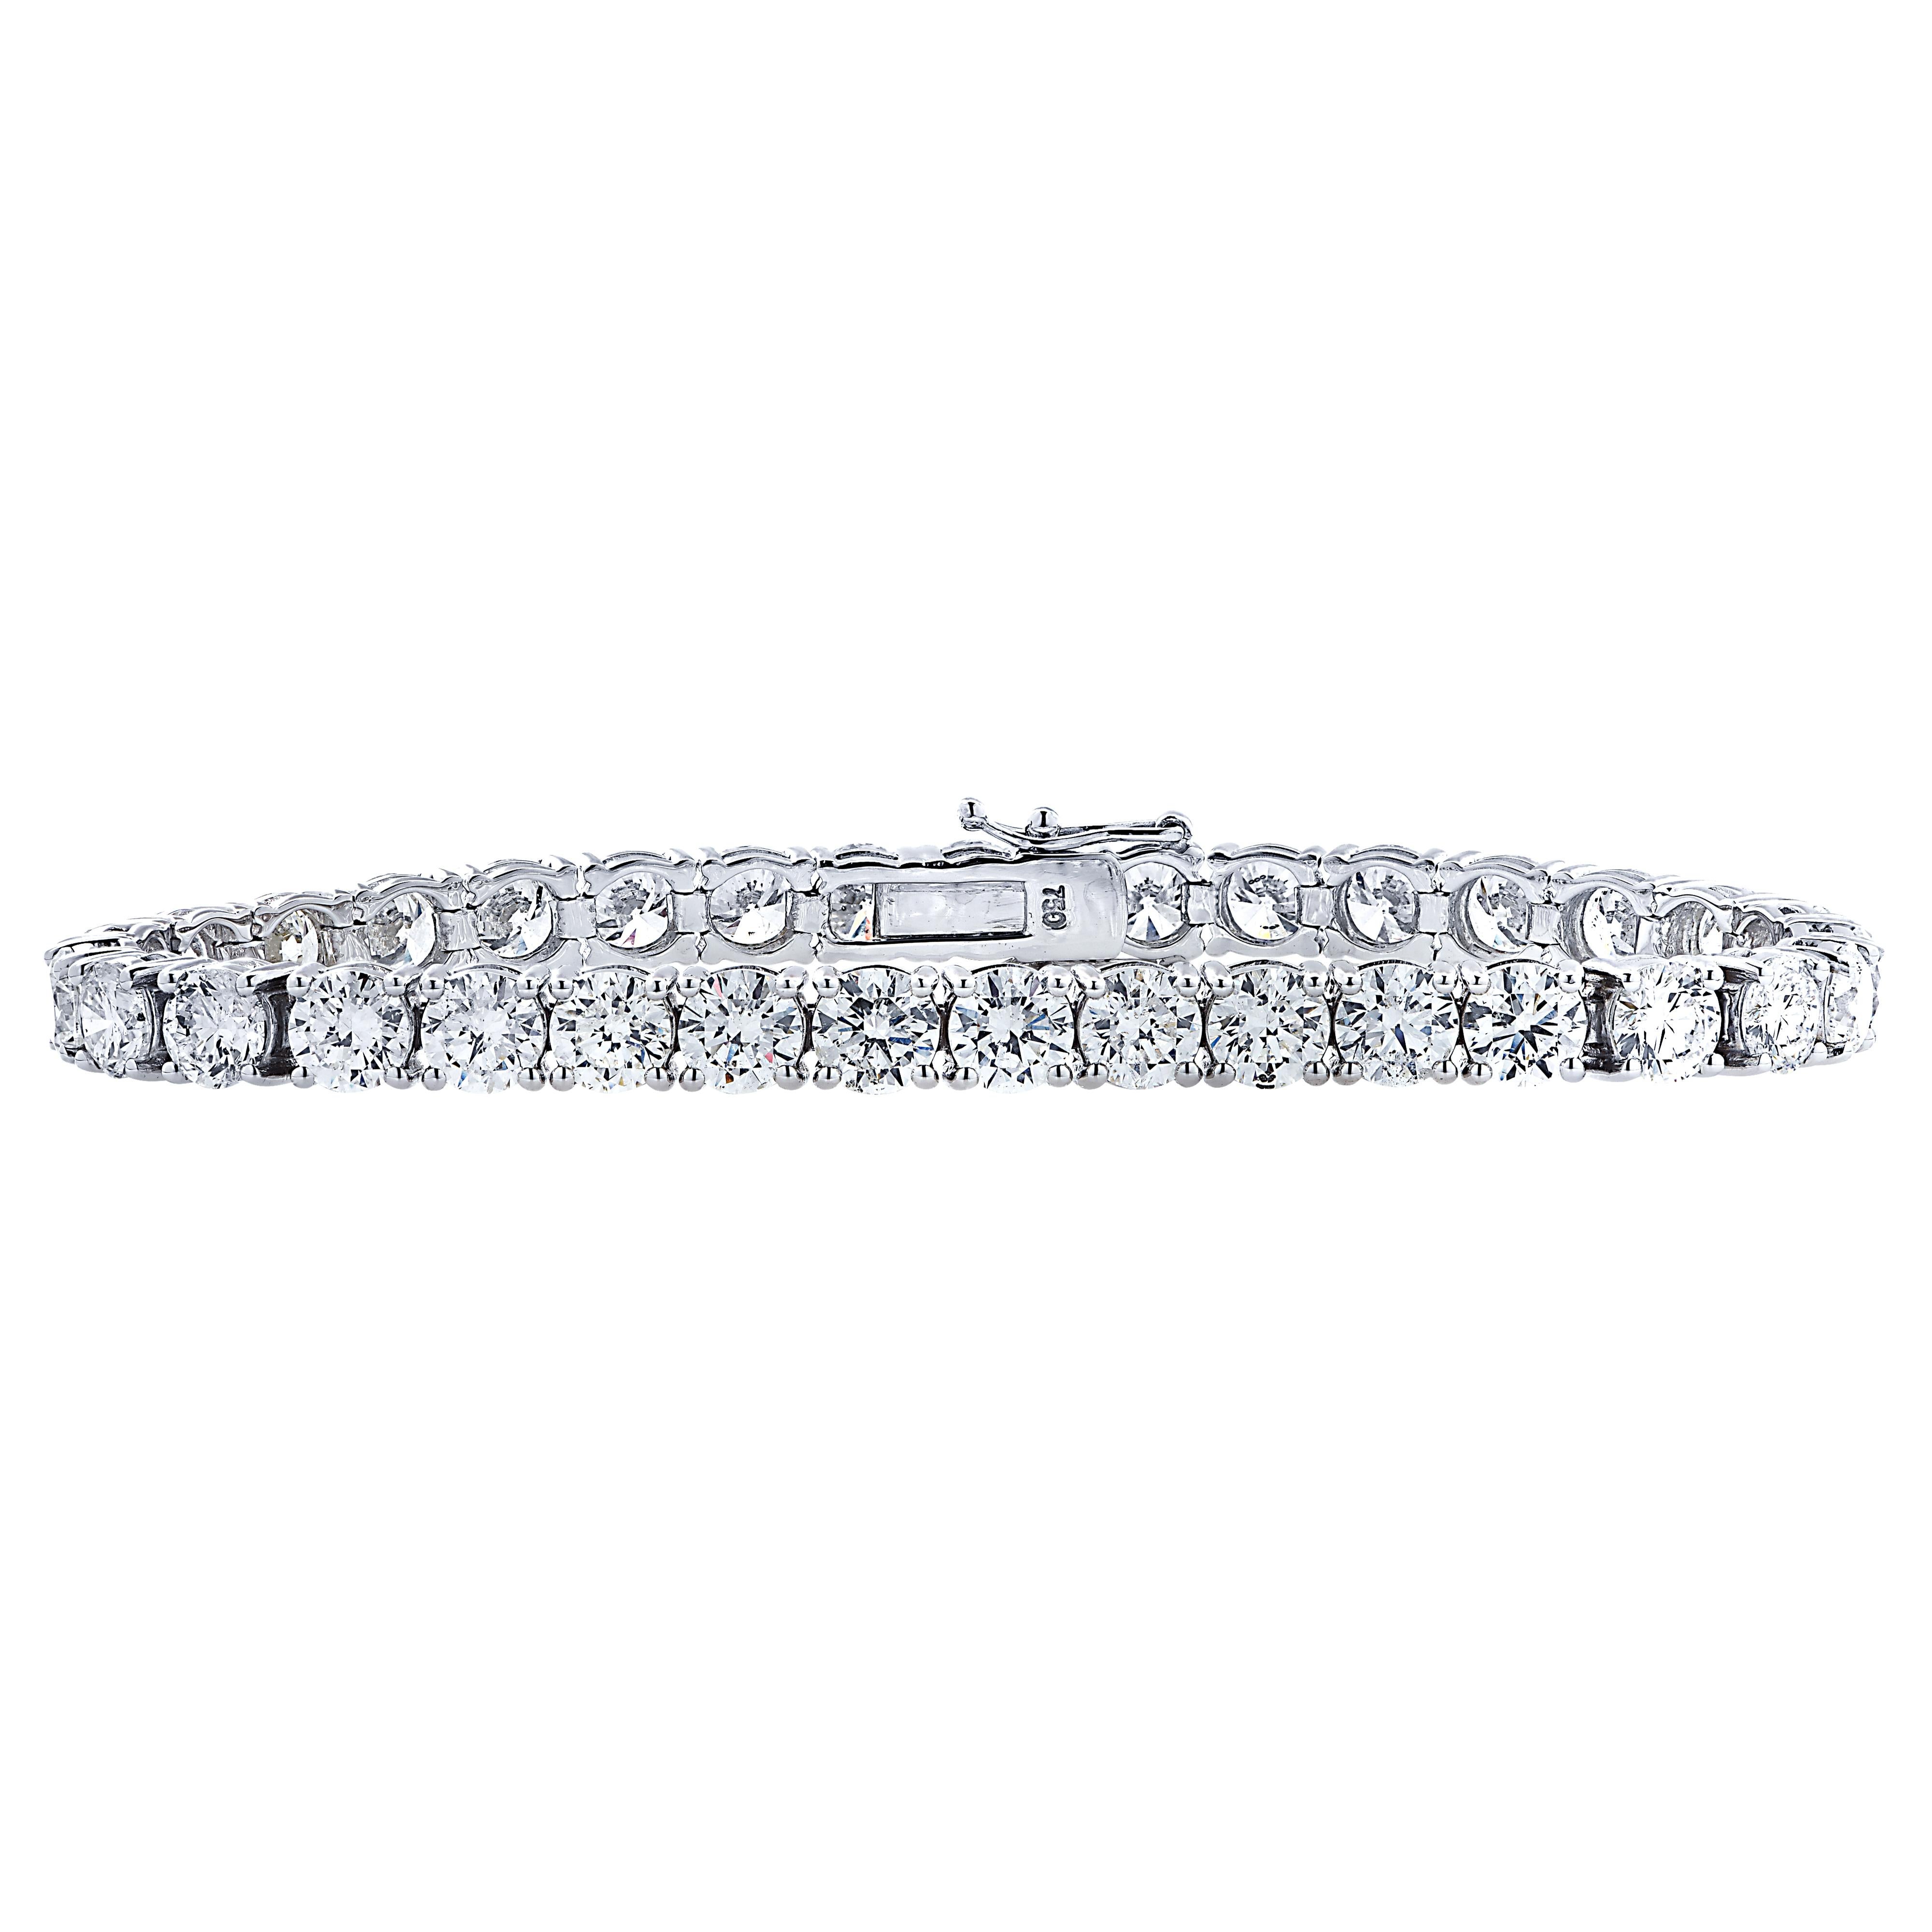 Exquisite diamond tennis bracelet crafted in 18 karat white gold, showcasing 33 stunning round brilliant cut diamonds weighing approximately 16.57 carats total, I color, VS-SI1 clarity. Each diamond is carefully selected, perfectly matched and set